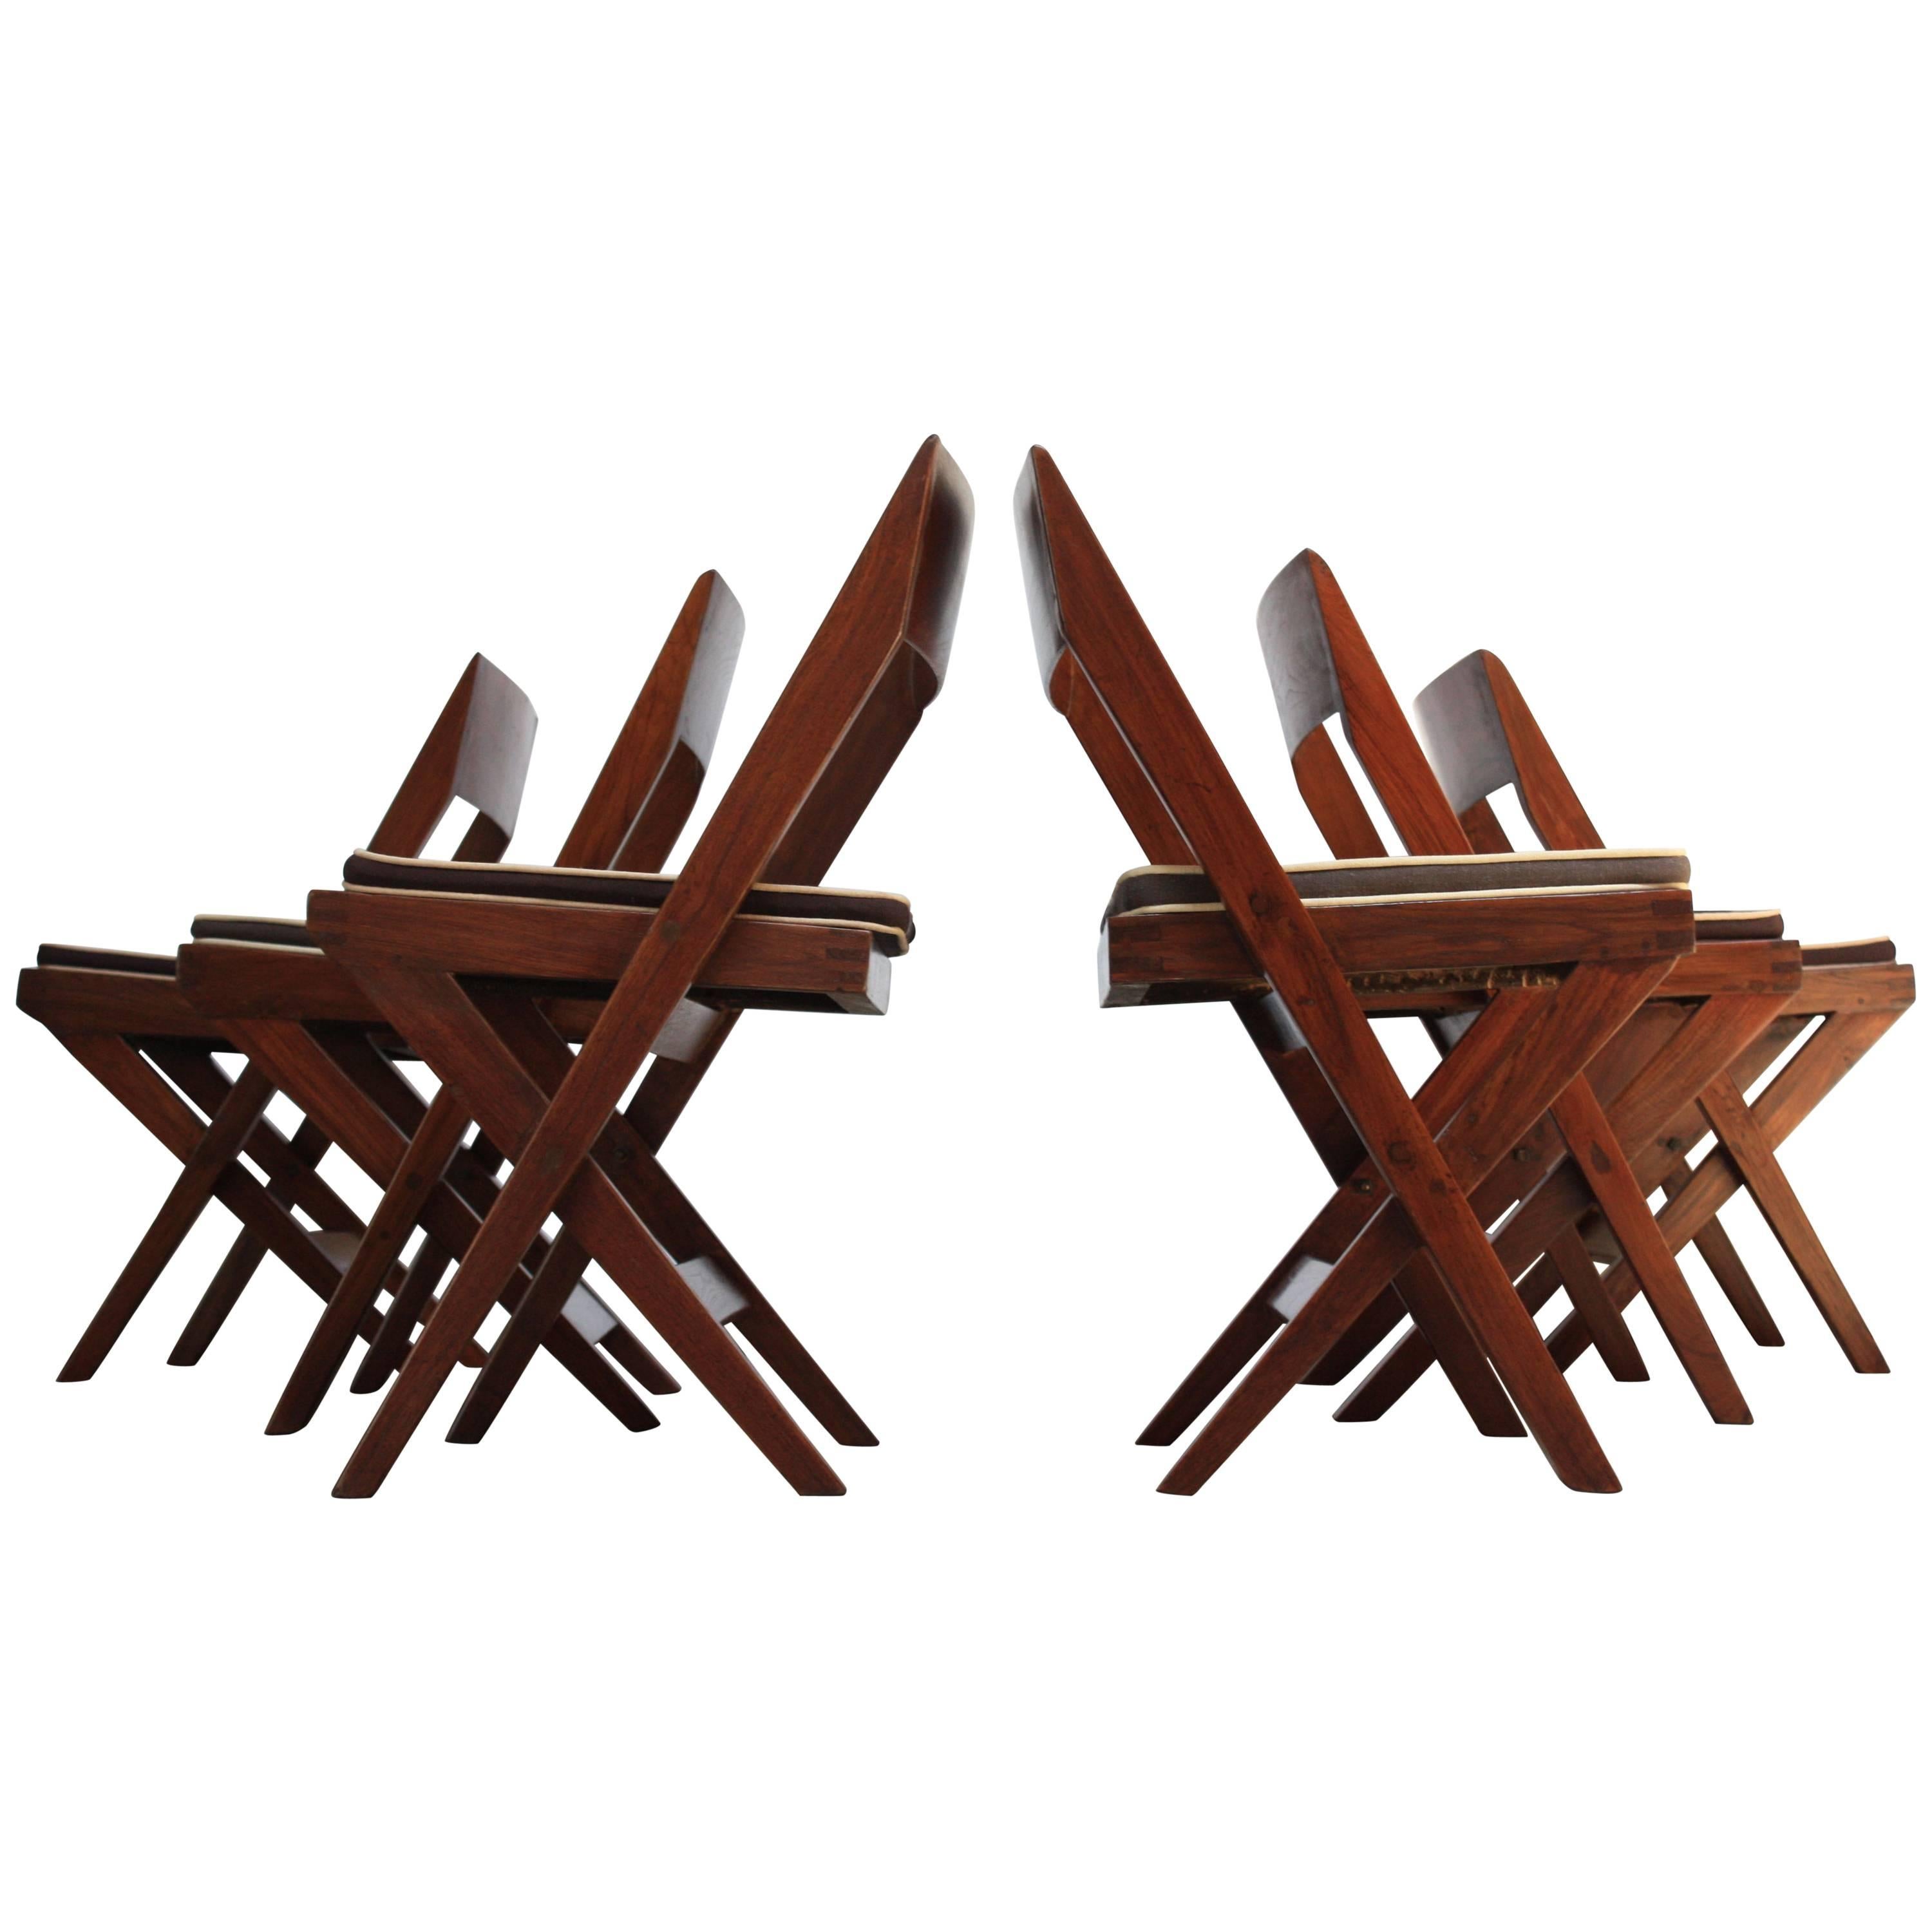 Set of Six Pierre Jeanneret Library Chairs in Teak and Cane